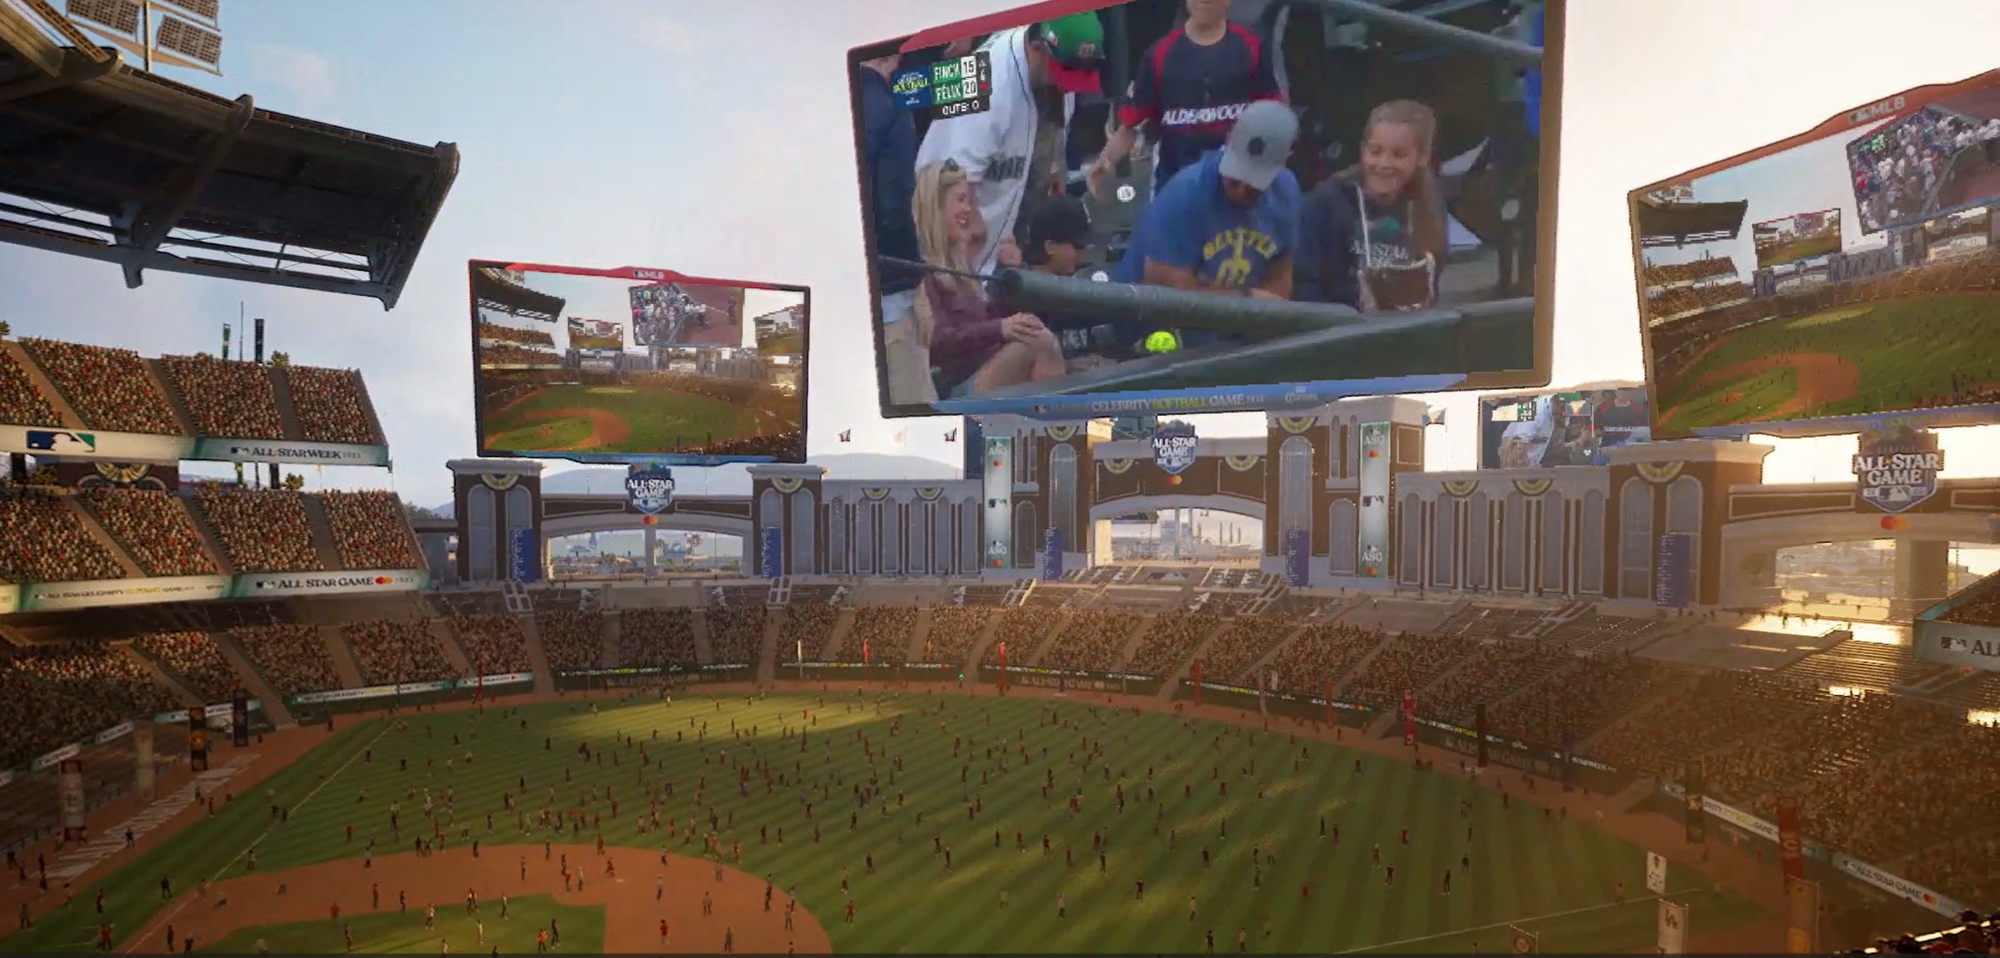 MLB Virtual Ballpark Offers Fans a New, Immersive Digital Experience for Consuming Live Games